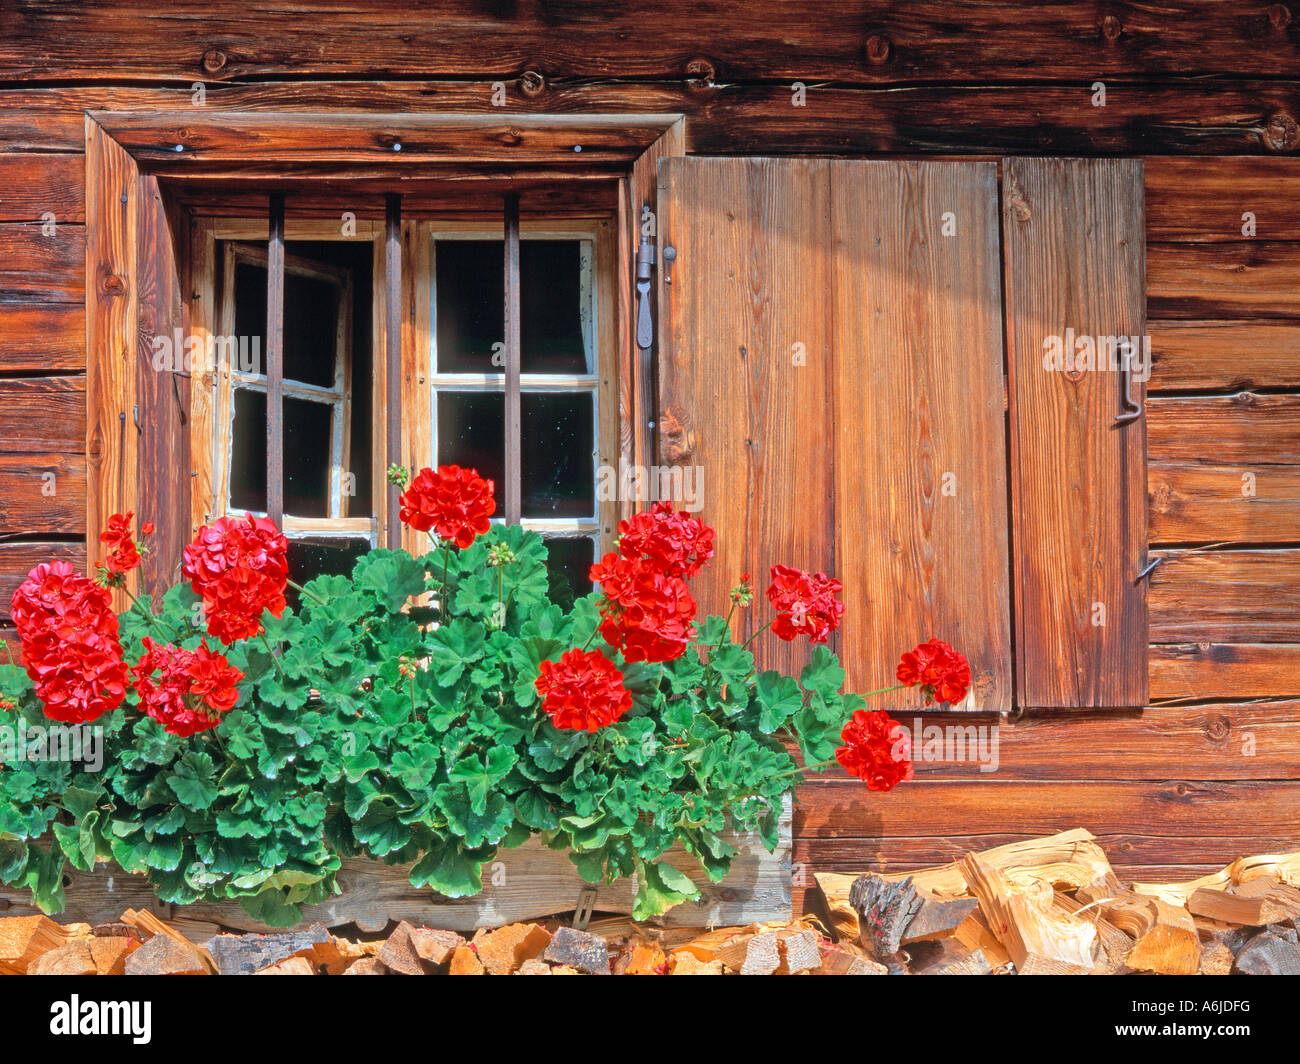 Window of a wooden alpine hut decorated with Geraniums, Austria Stock Photo